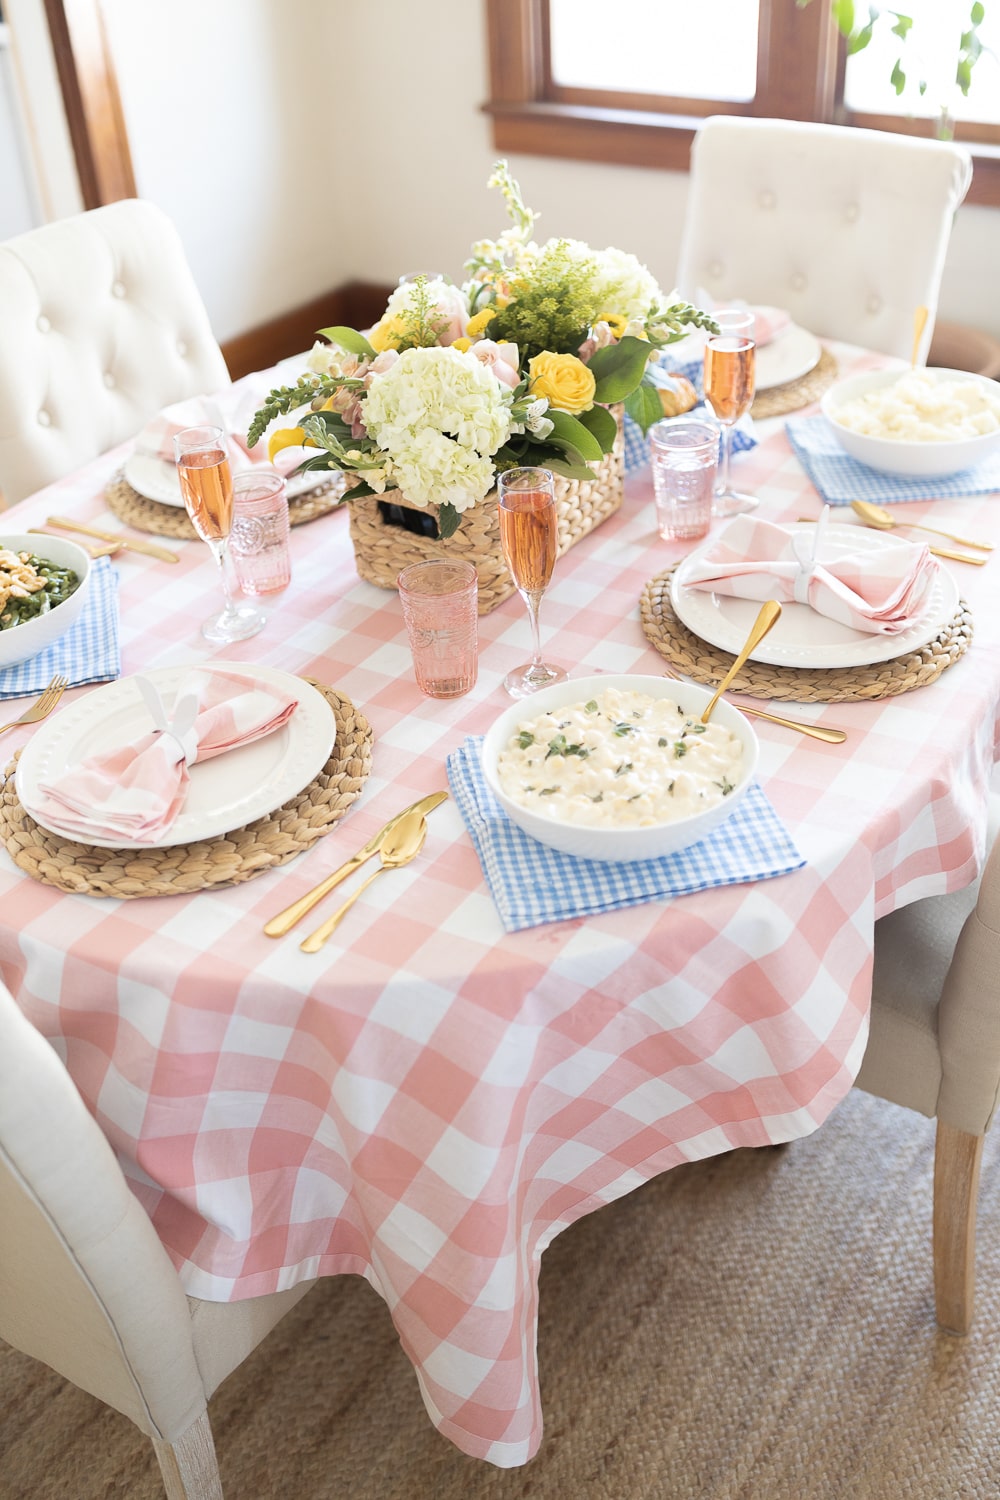 Easter dining table decor designed by blogger Stephanie Ziajka on Diary of a Debutante